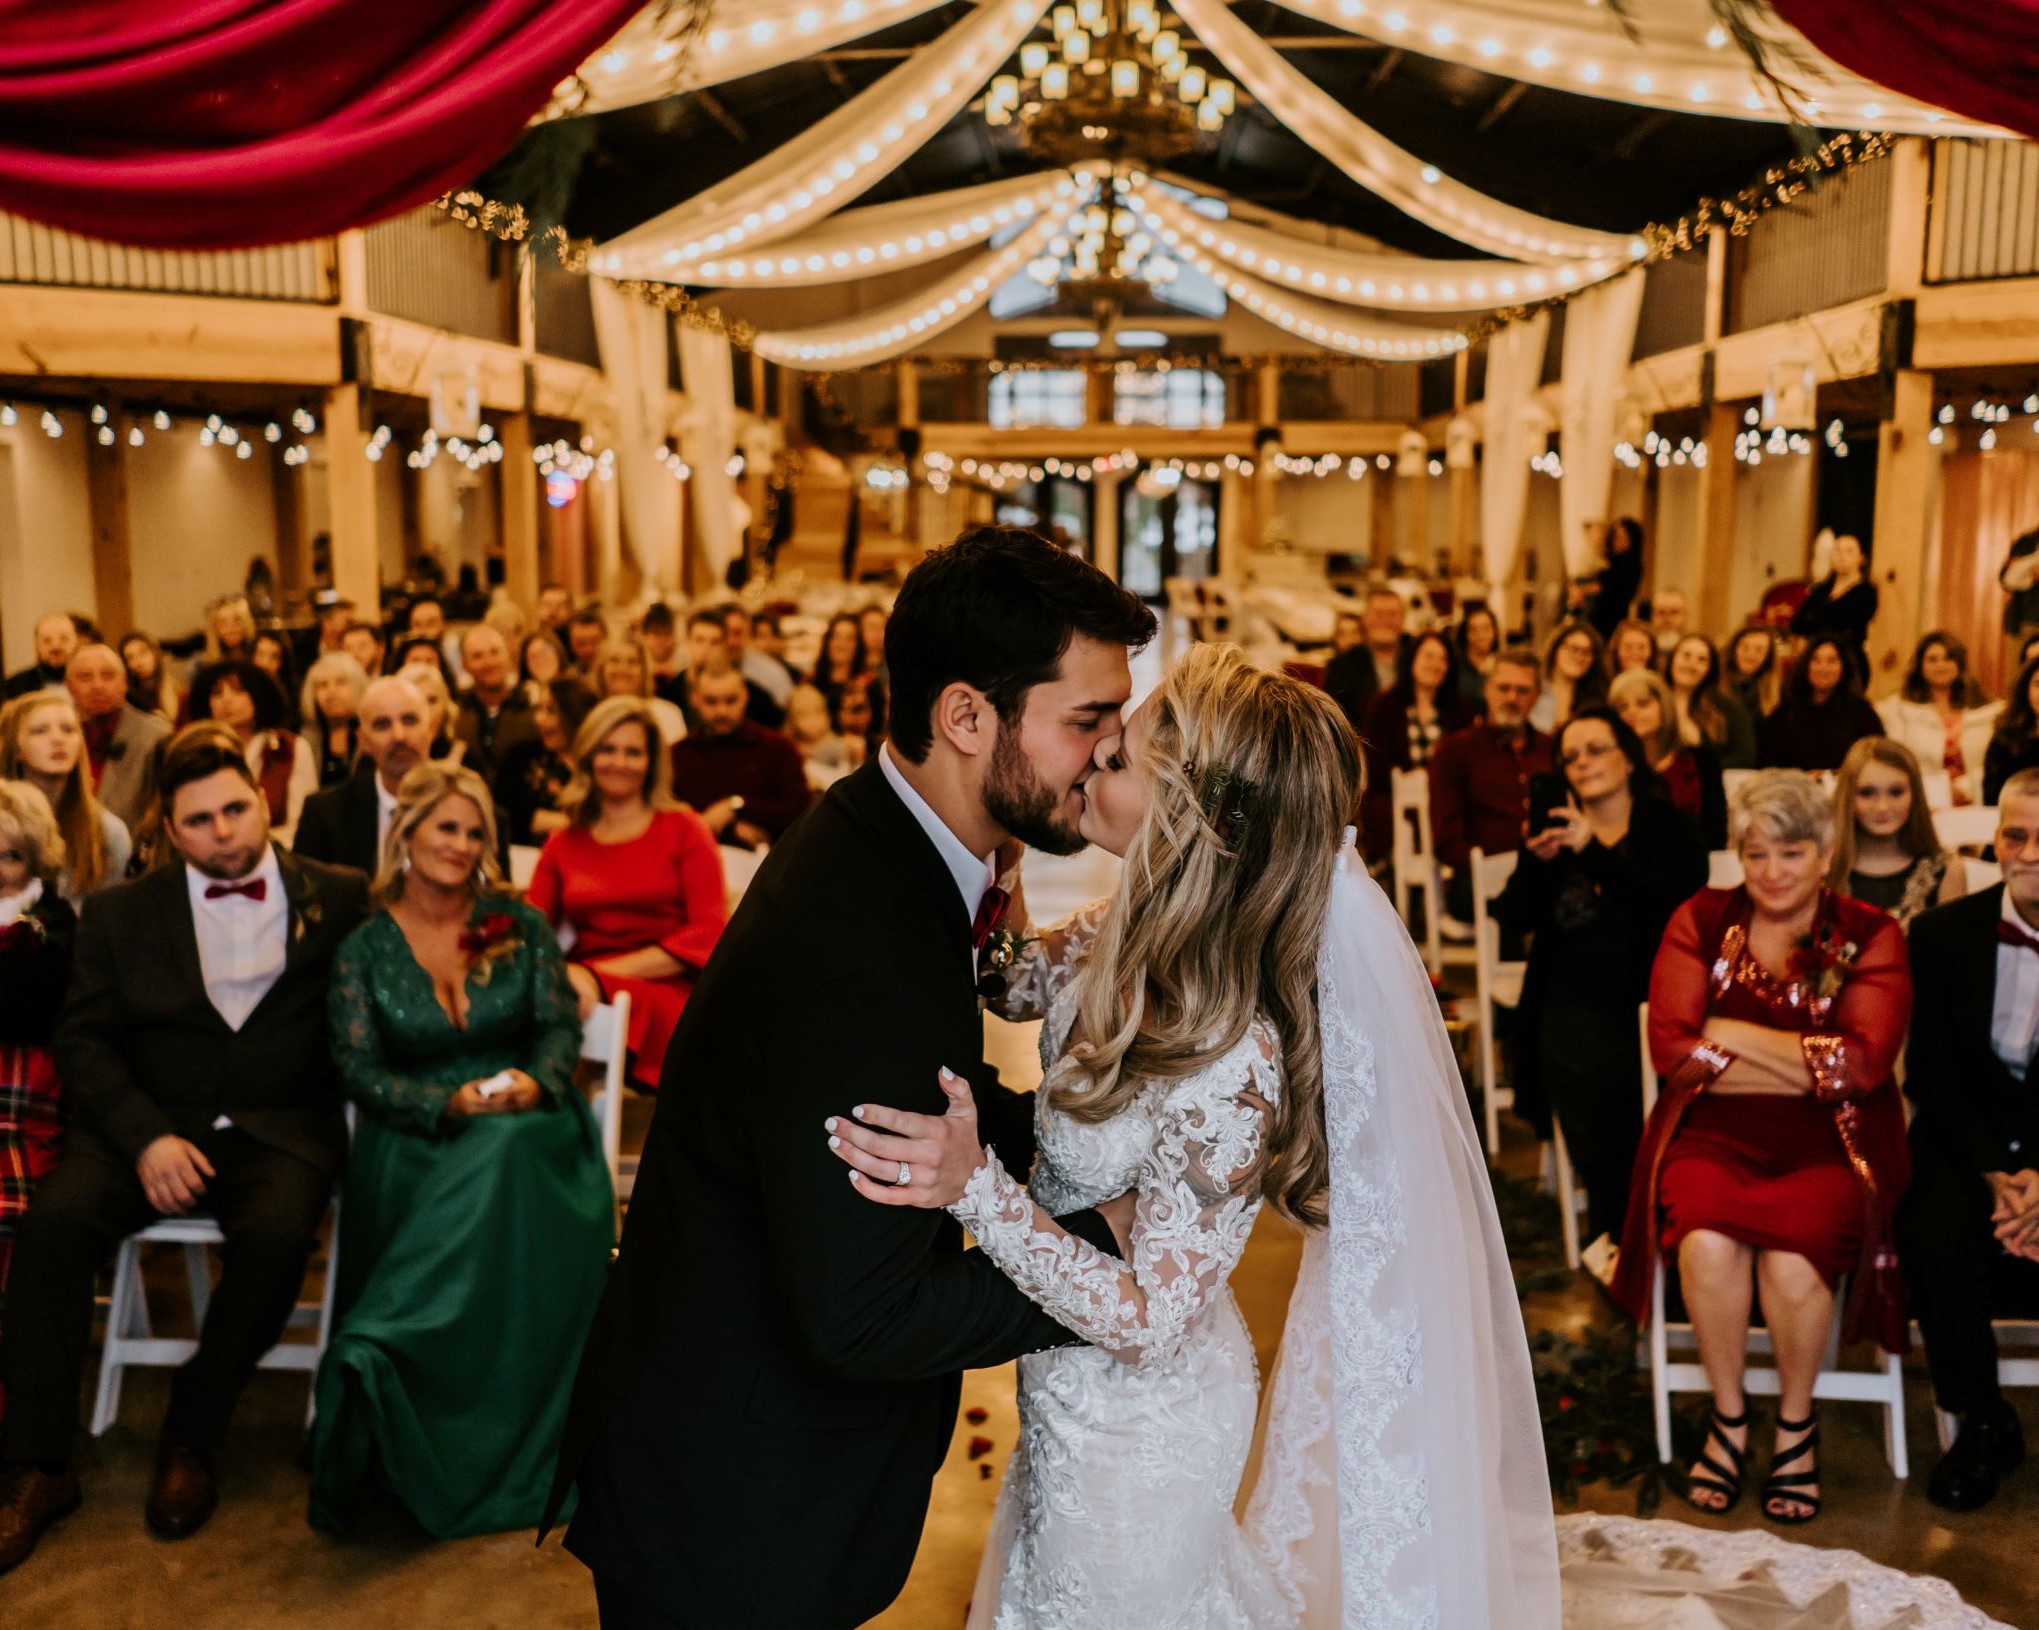 A first kiss as a married couple at The Vineyard Hall - A Rustic Wedding Venue